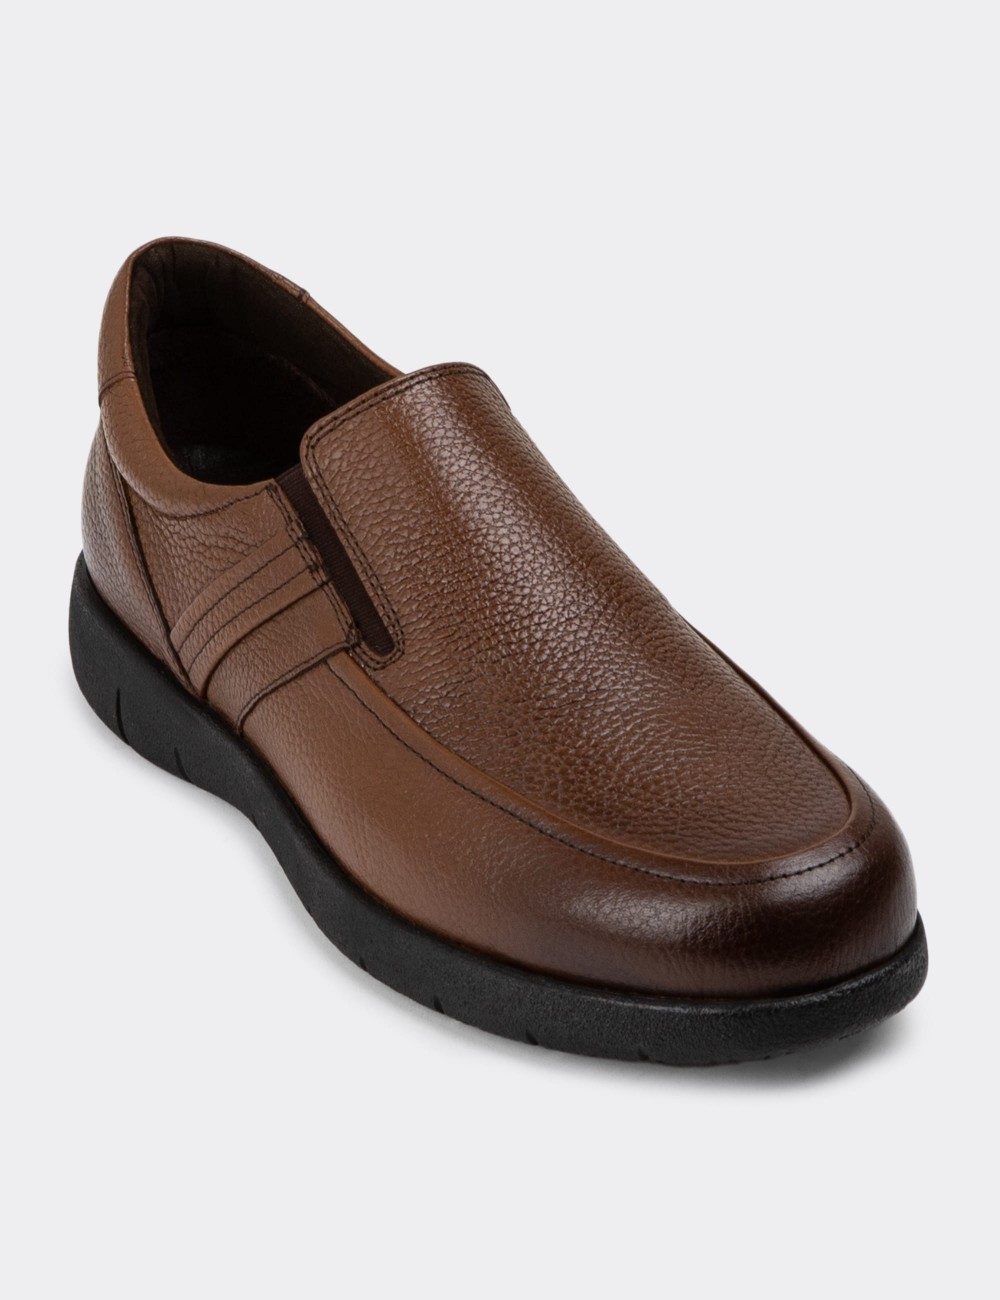 Tan Leather Loafers Shoes - 01946MTBAC01